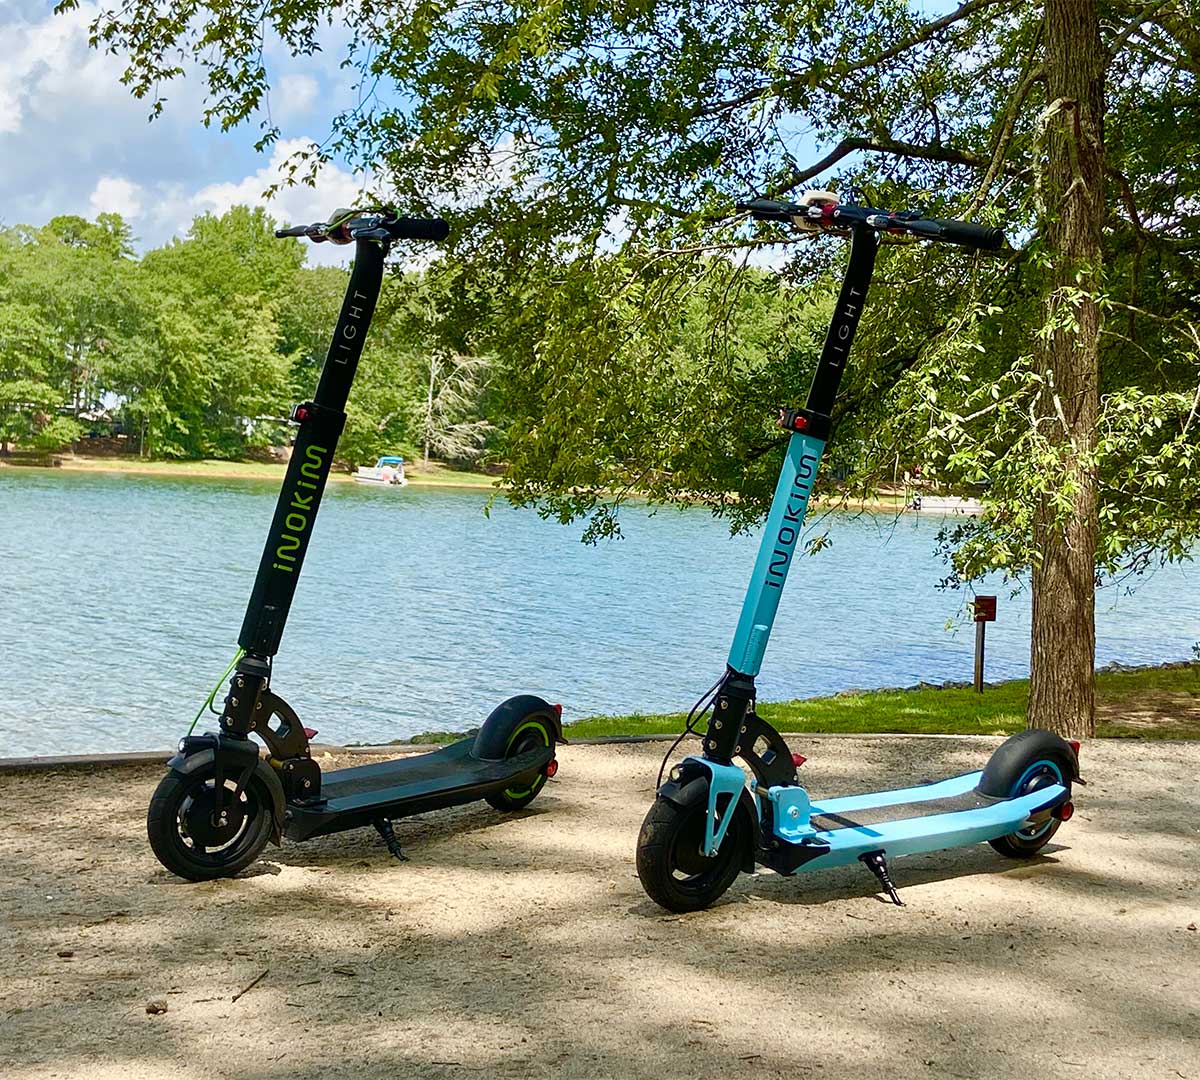 Two electric scooters, one black and one teal, rest side by side on a sandy lakeside path, offering a sustainable way to enjoy nature.